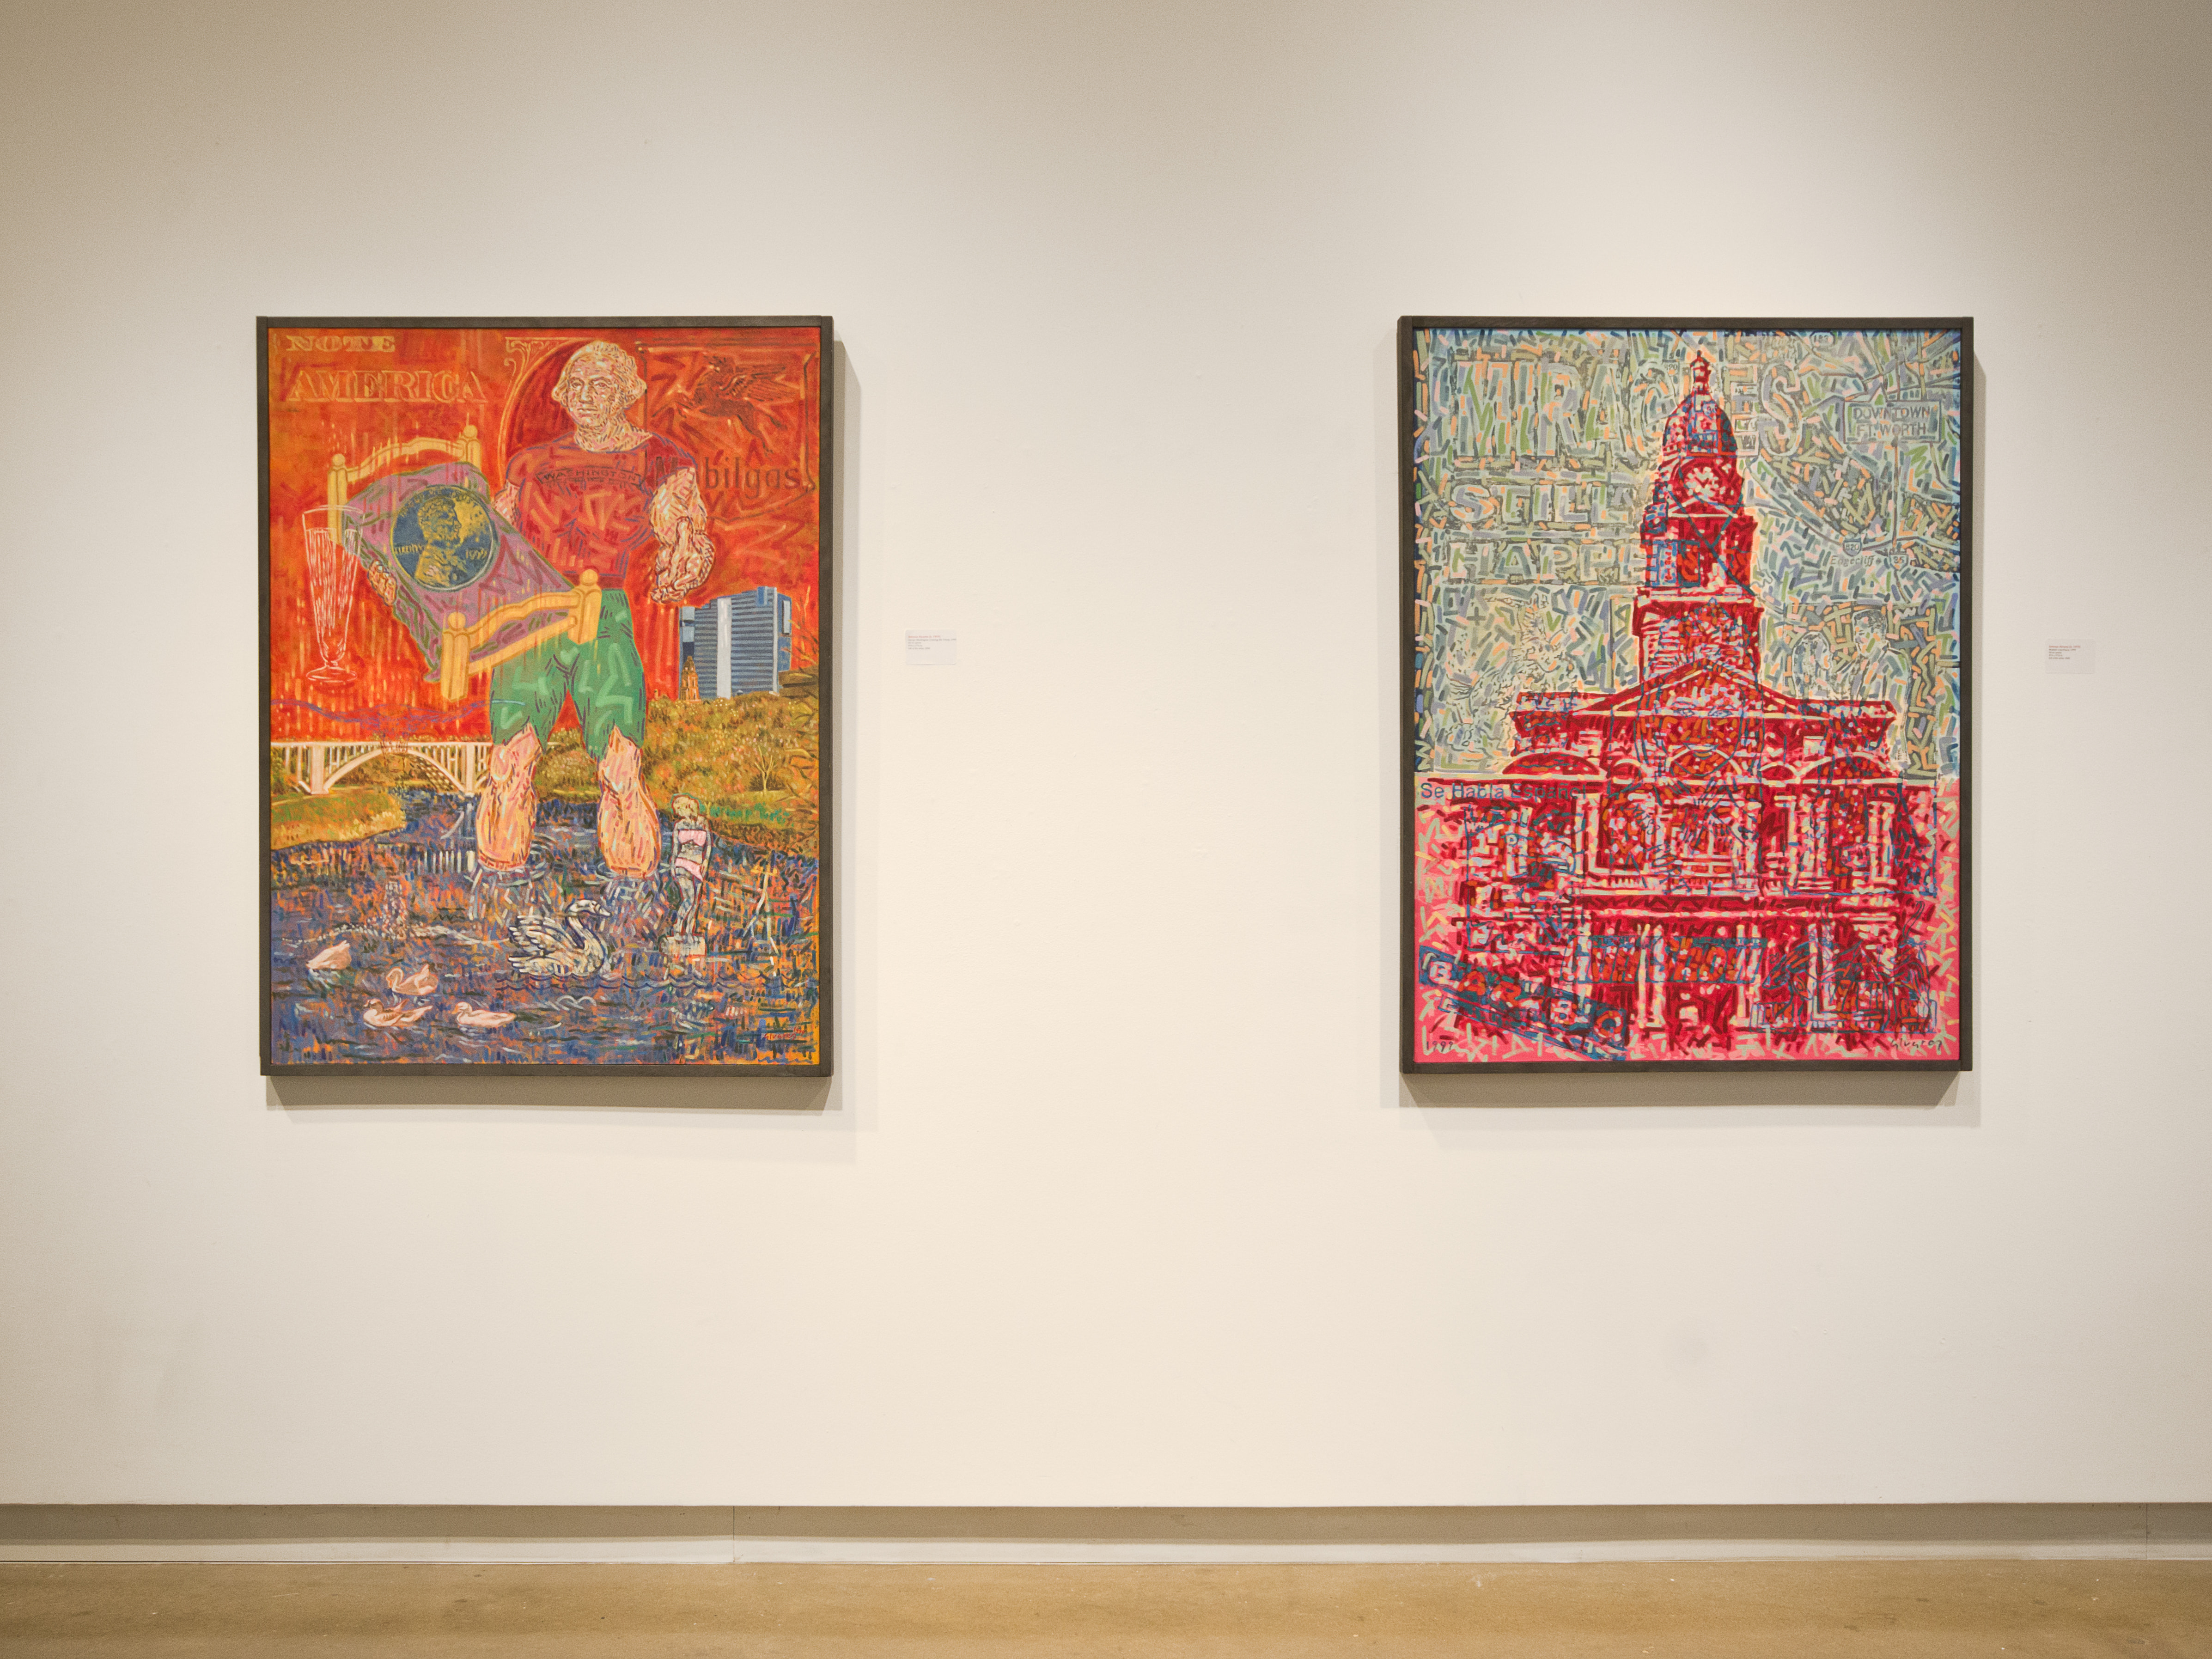 B 15-02-6.From the exhibit "States of the Union: Highlights from the TCU Permanent Collection", The Moudy Gallery, January 20-February 19, 2015. View of two works by Antonio Alvarez (b.1959). Left: George Washington Crossing the Trinity, 1999, oil on canvas; right: Medium Courthouse, 1999, oil on canvas. Both works gifted by the artist to TCU in 2000.